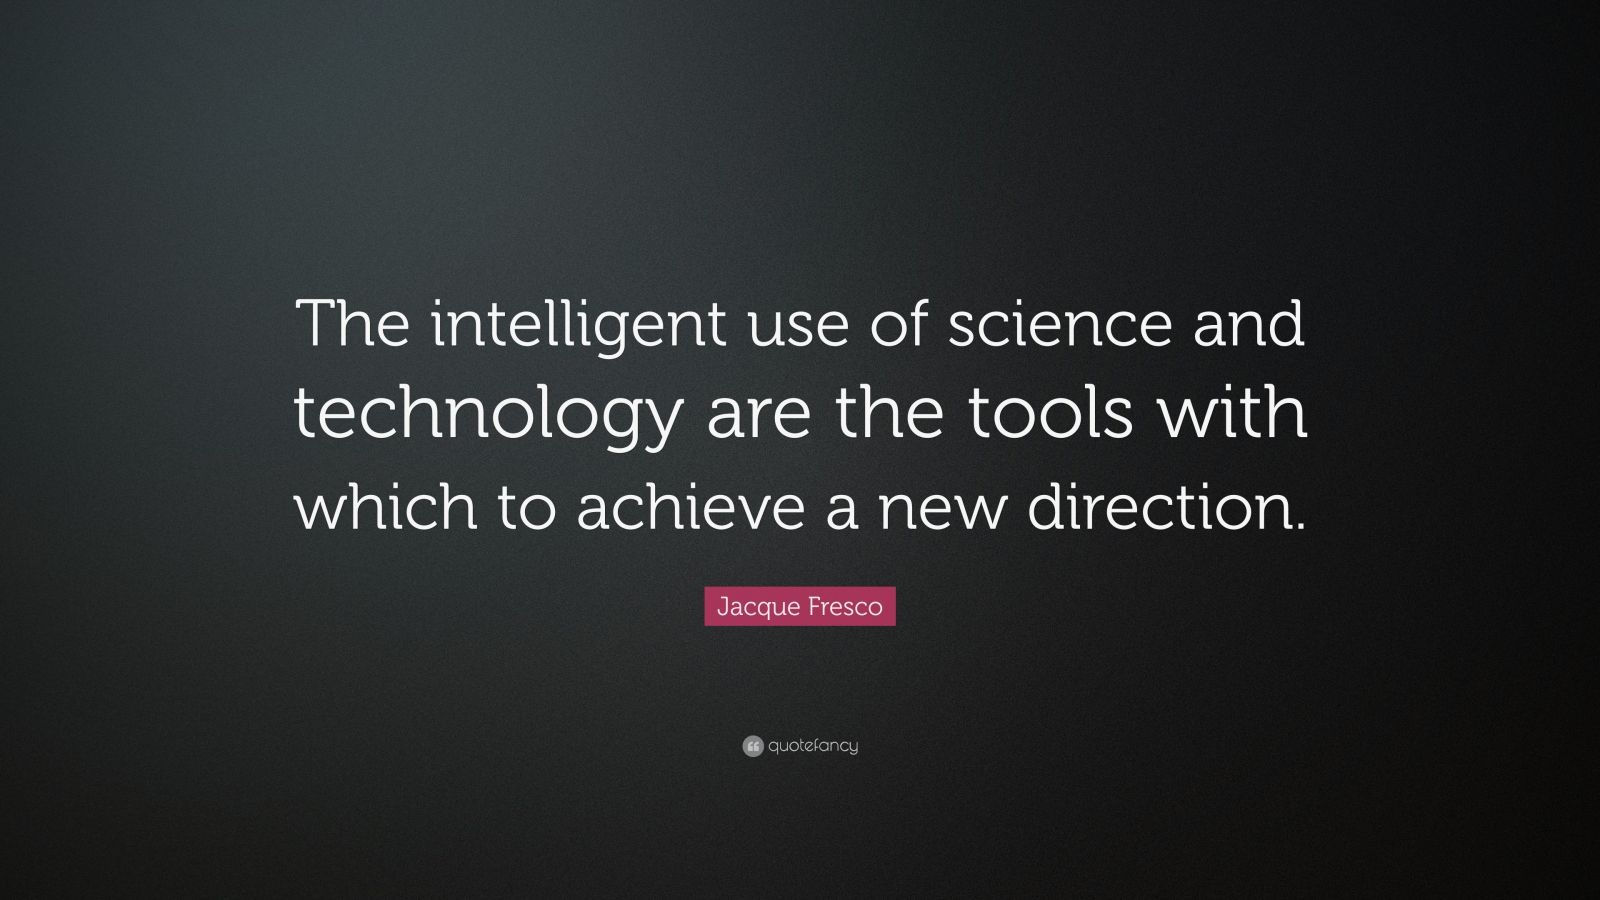 Jacque Fresco Quote: “The intelligent use of science and technology are ...